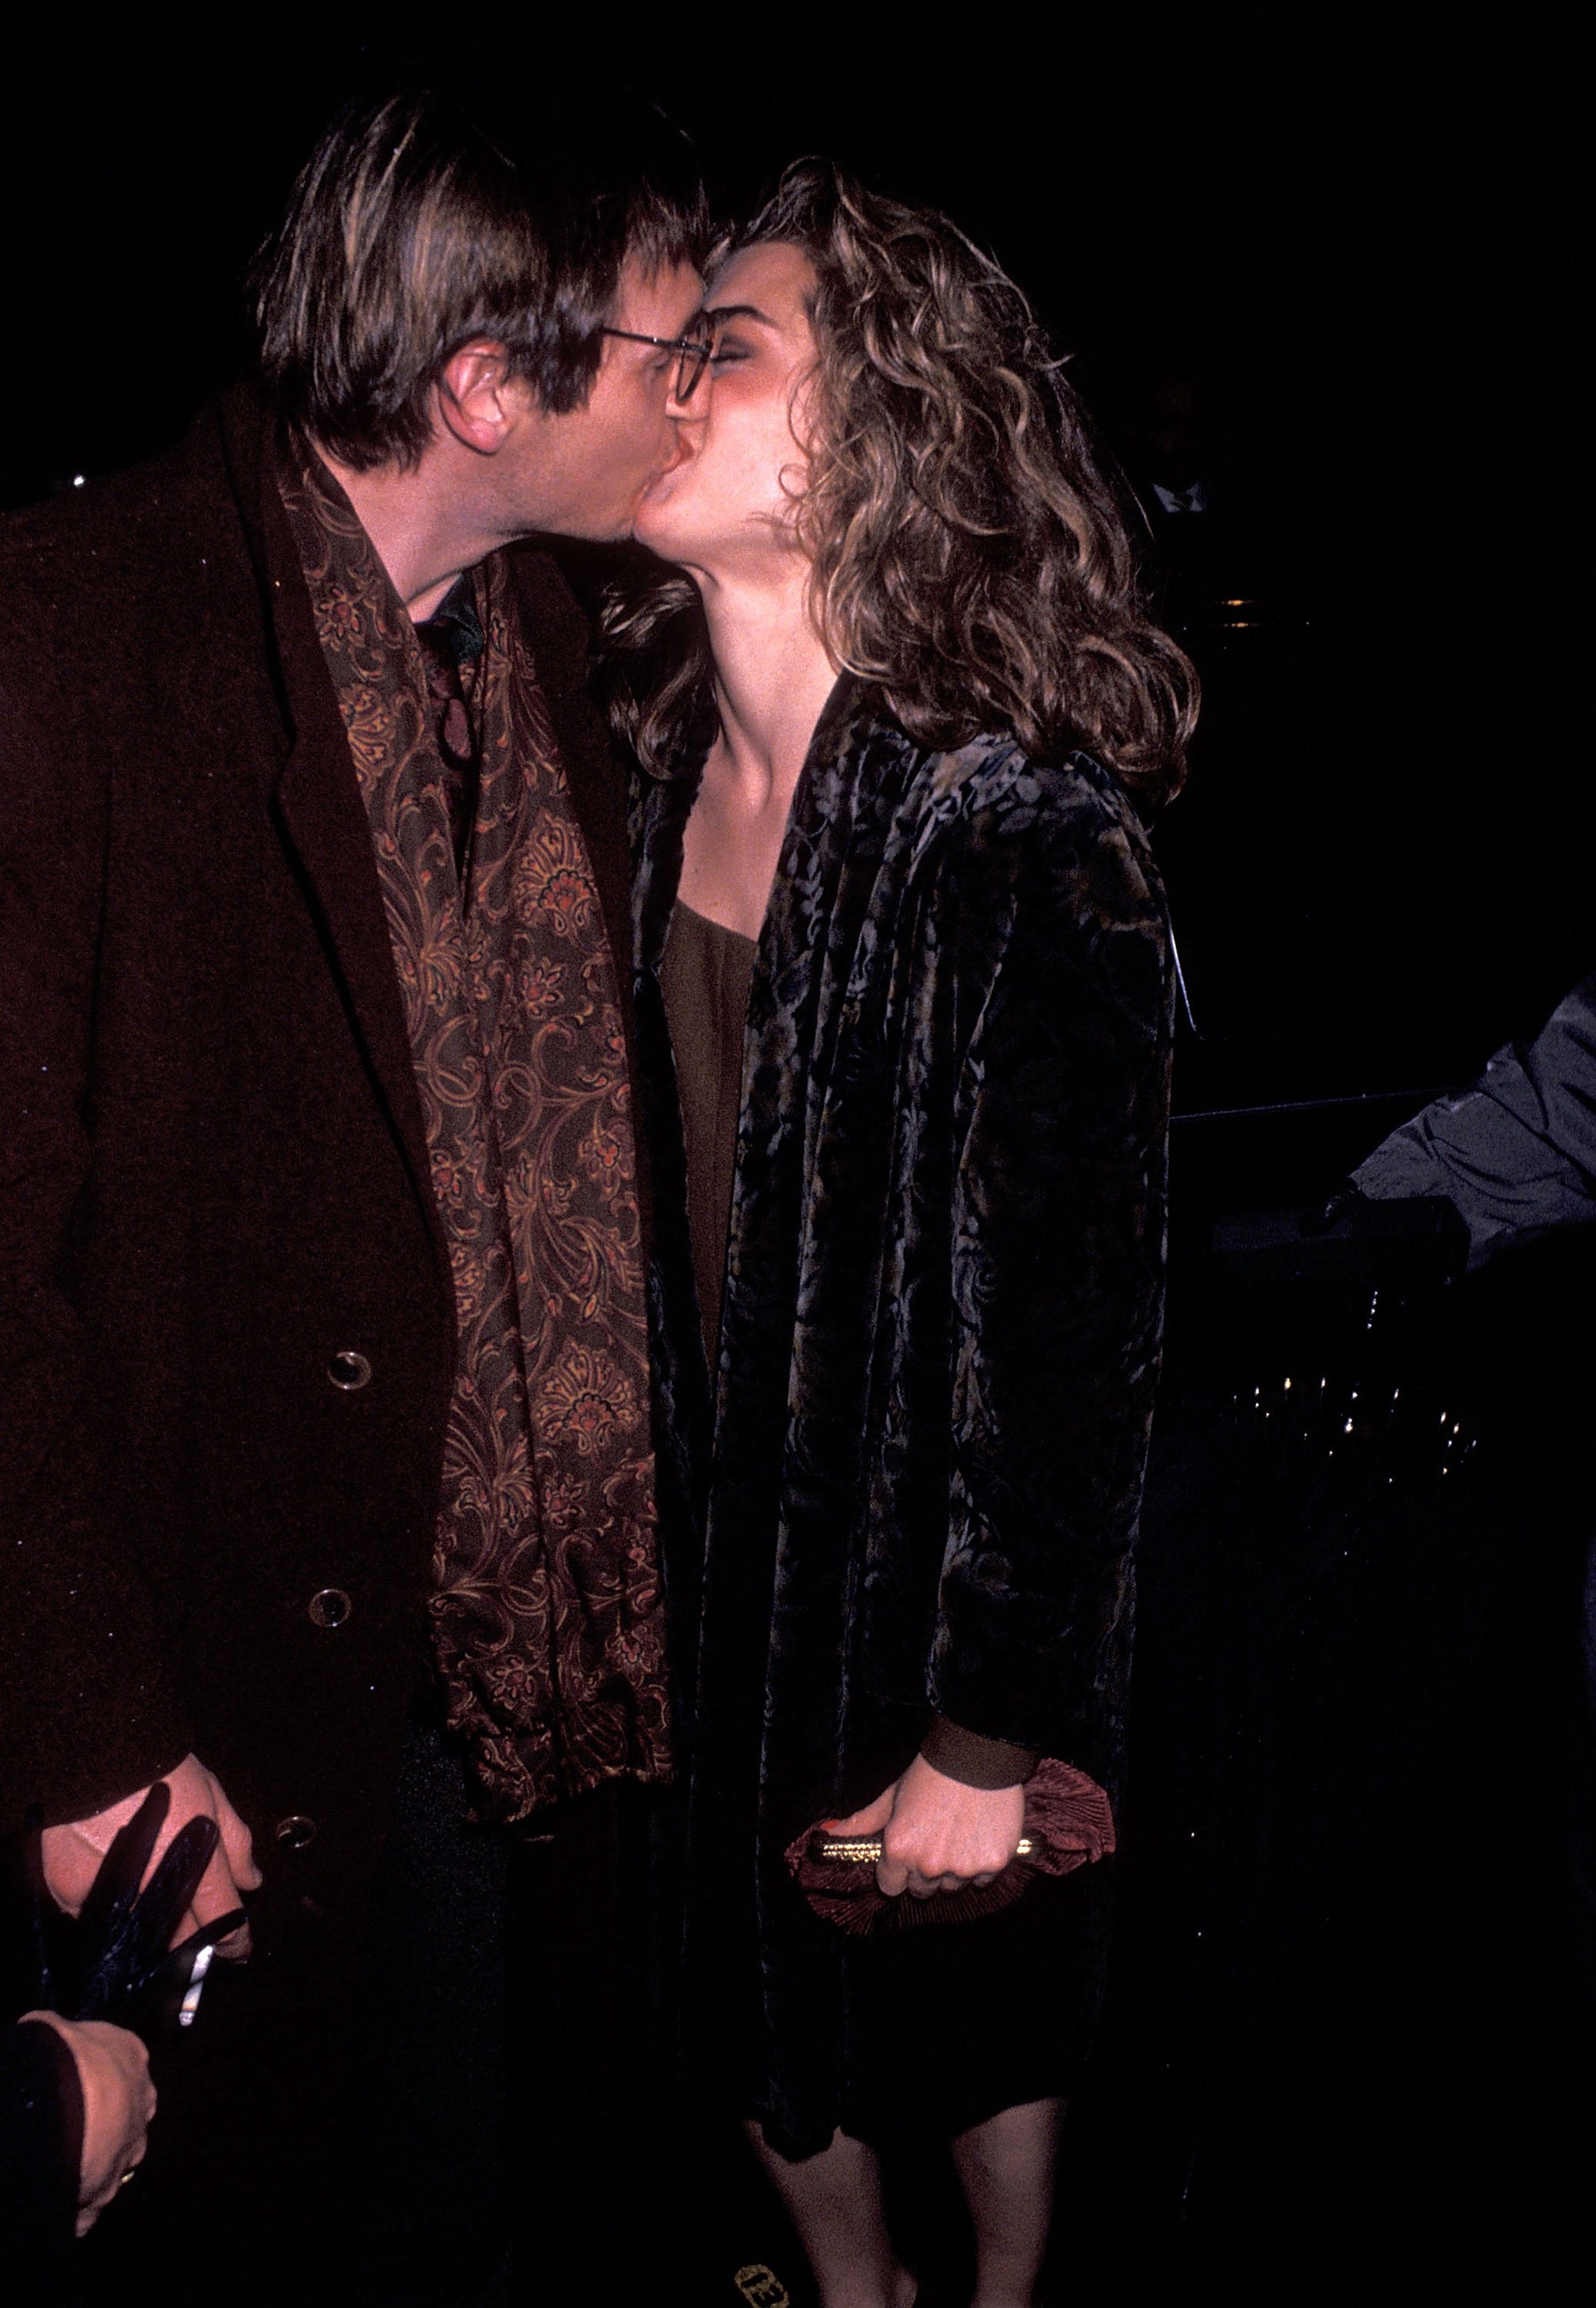 Actor Liam Neeson and actress Brooke Shields at the "Under Suspicion" New York City Premiere on February 24, 1992 at the Loews Fine Arts Theatre in New York City. | Source: Getty Images